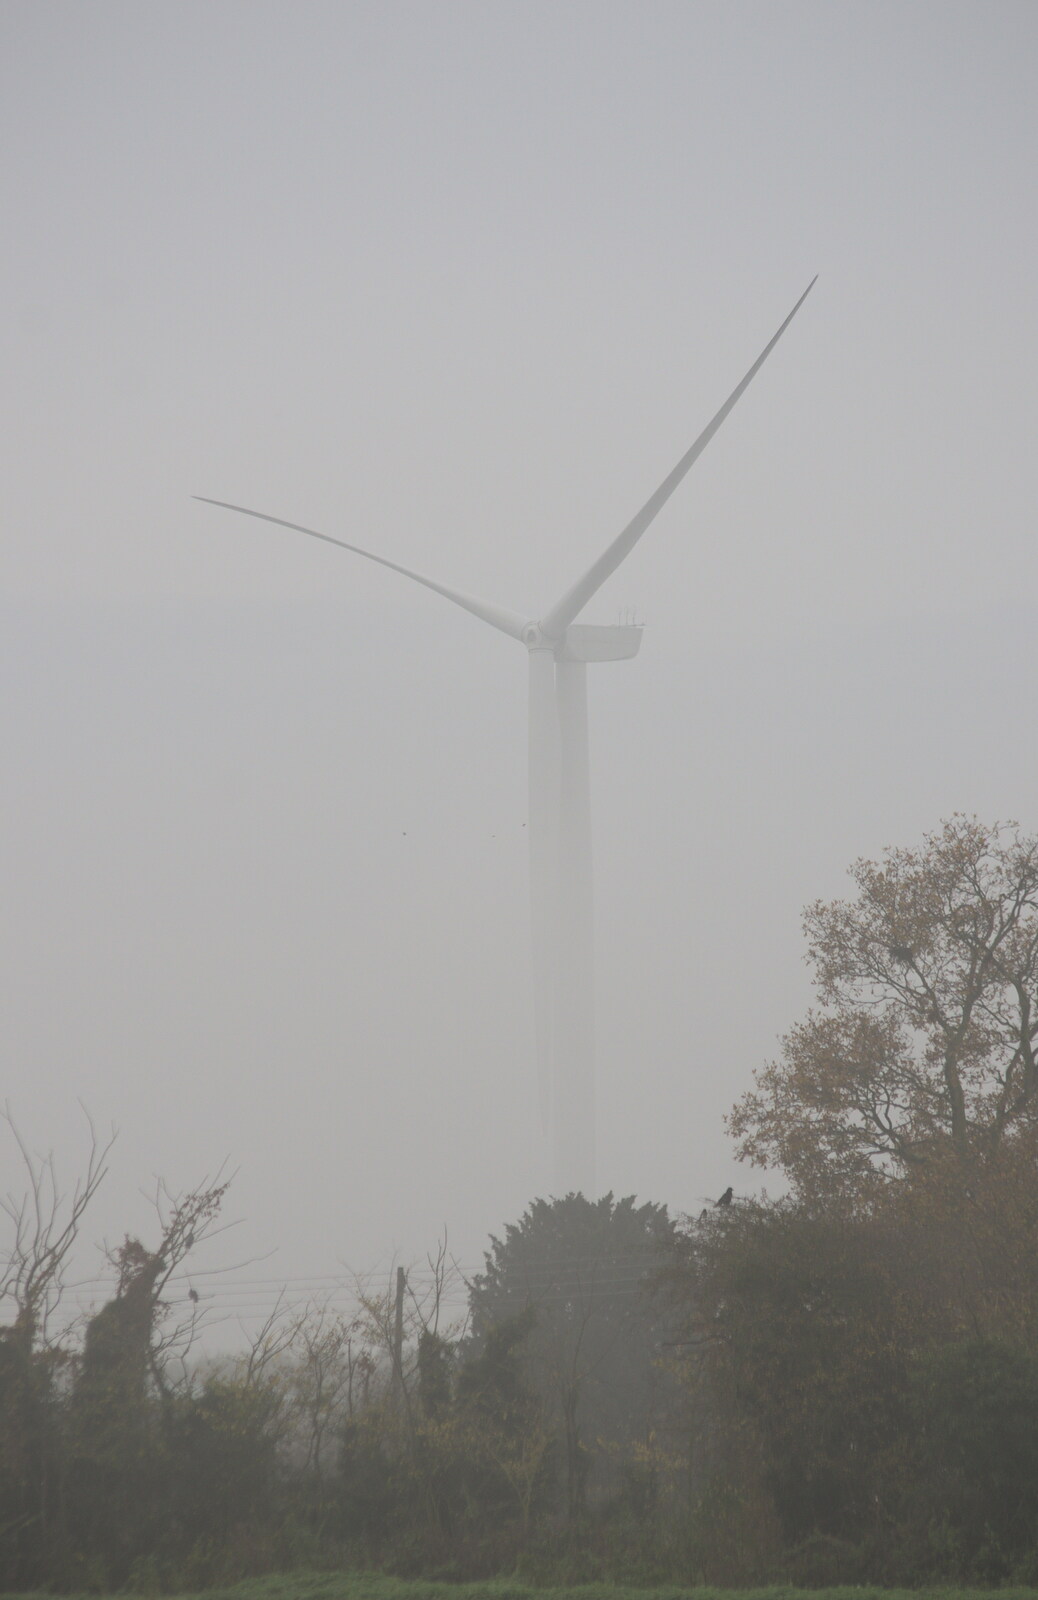 A wind turbine looms out of the mist from November Singing, Gislingham Primary School, Suffolk - 17th November 2014